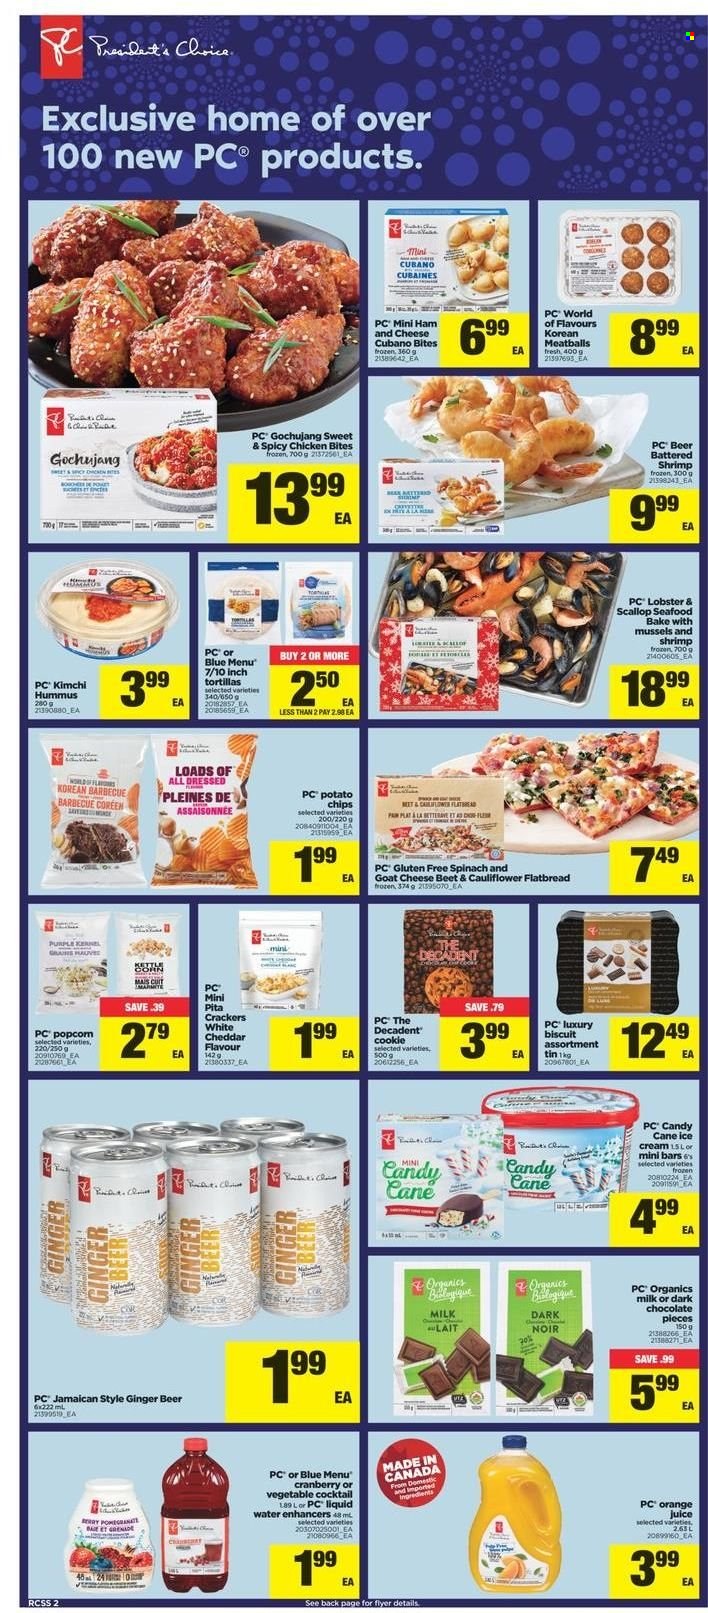 thumbnail - Real Canadian Superstore Flyer - December 26, 2021 - December 29, 2021 - Sales products - tortillas, pita, flatbread, spinach, lobster, mussels, scallops, seafood, shrimps, meatballs, ham, hummus, goat cheese, organic milk, chicken bites, chocolate, candy cane, crackers, biscuit, orange juice, juice, L'Or, beer, ginger beer. Page 2.